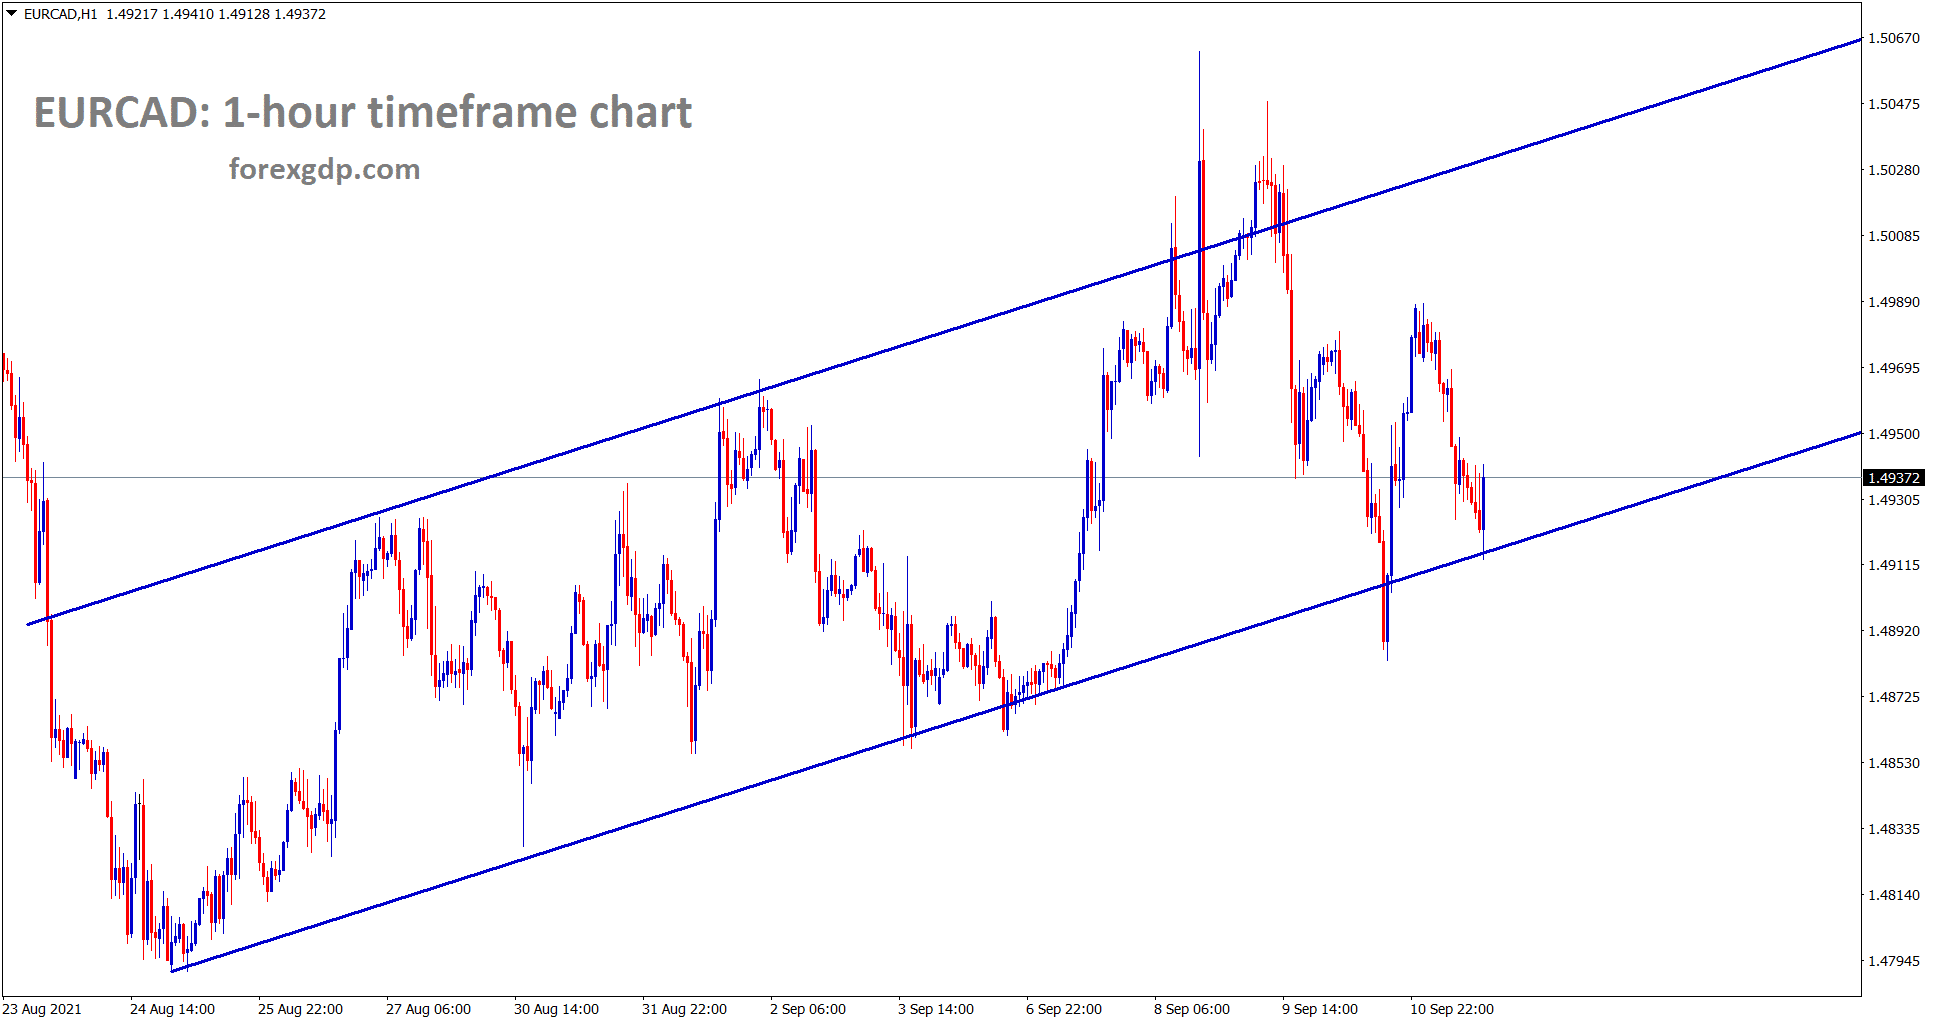 EURCAD is moving in a minor ascending channel for a long time